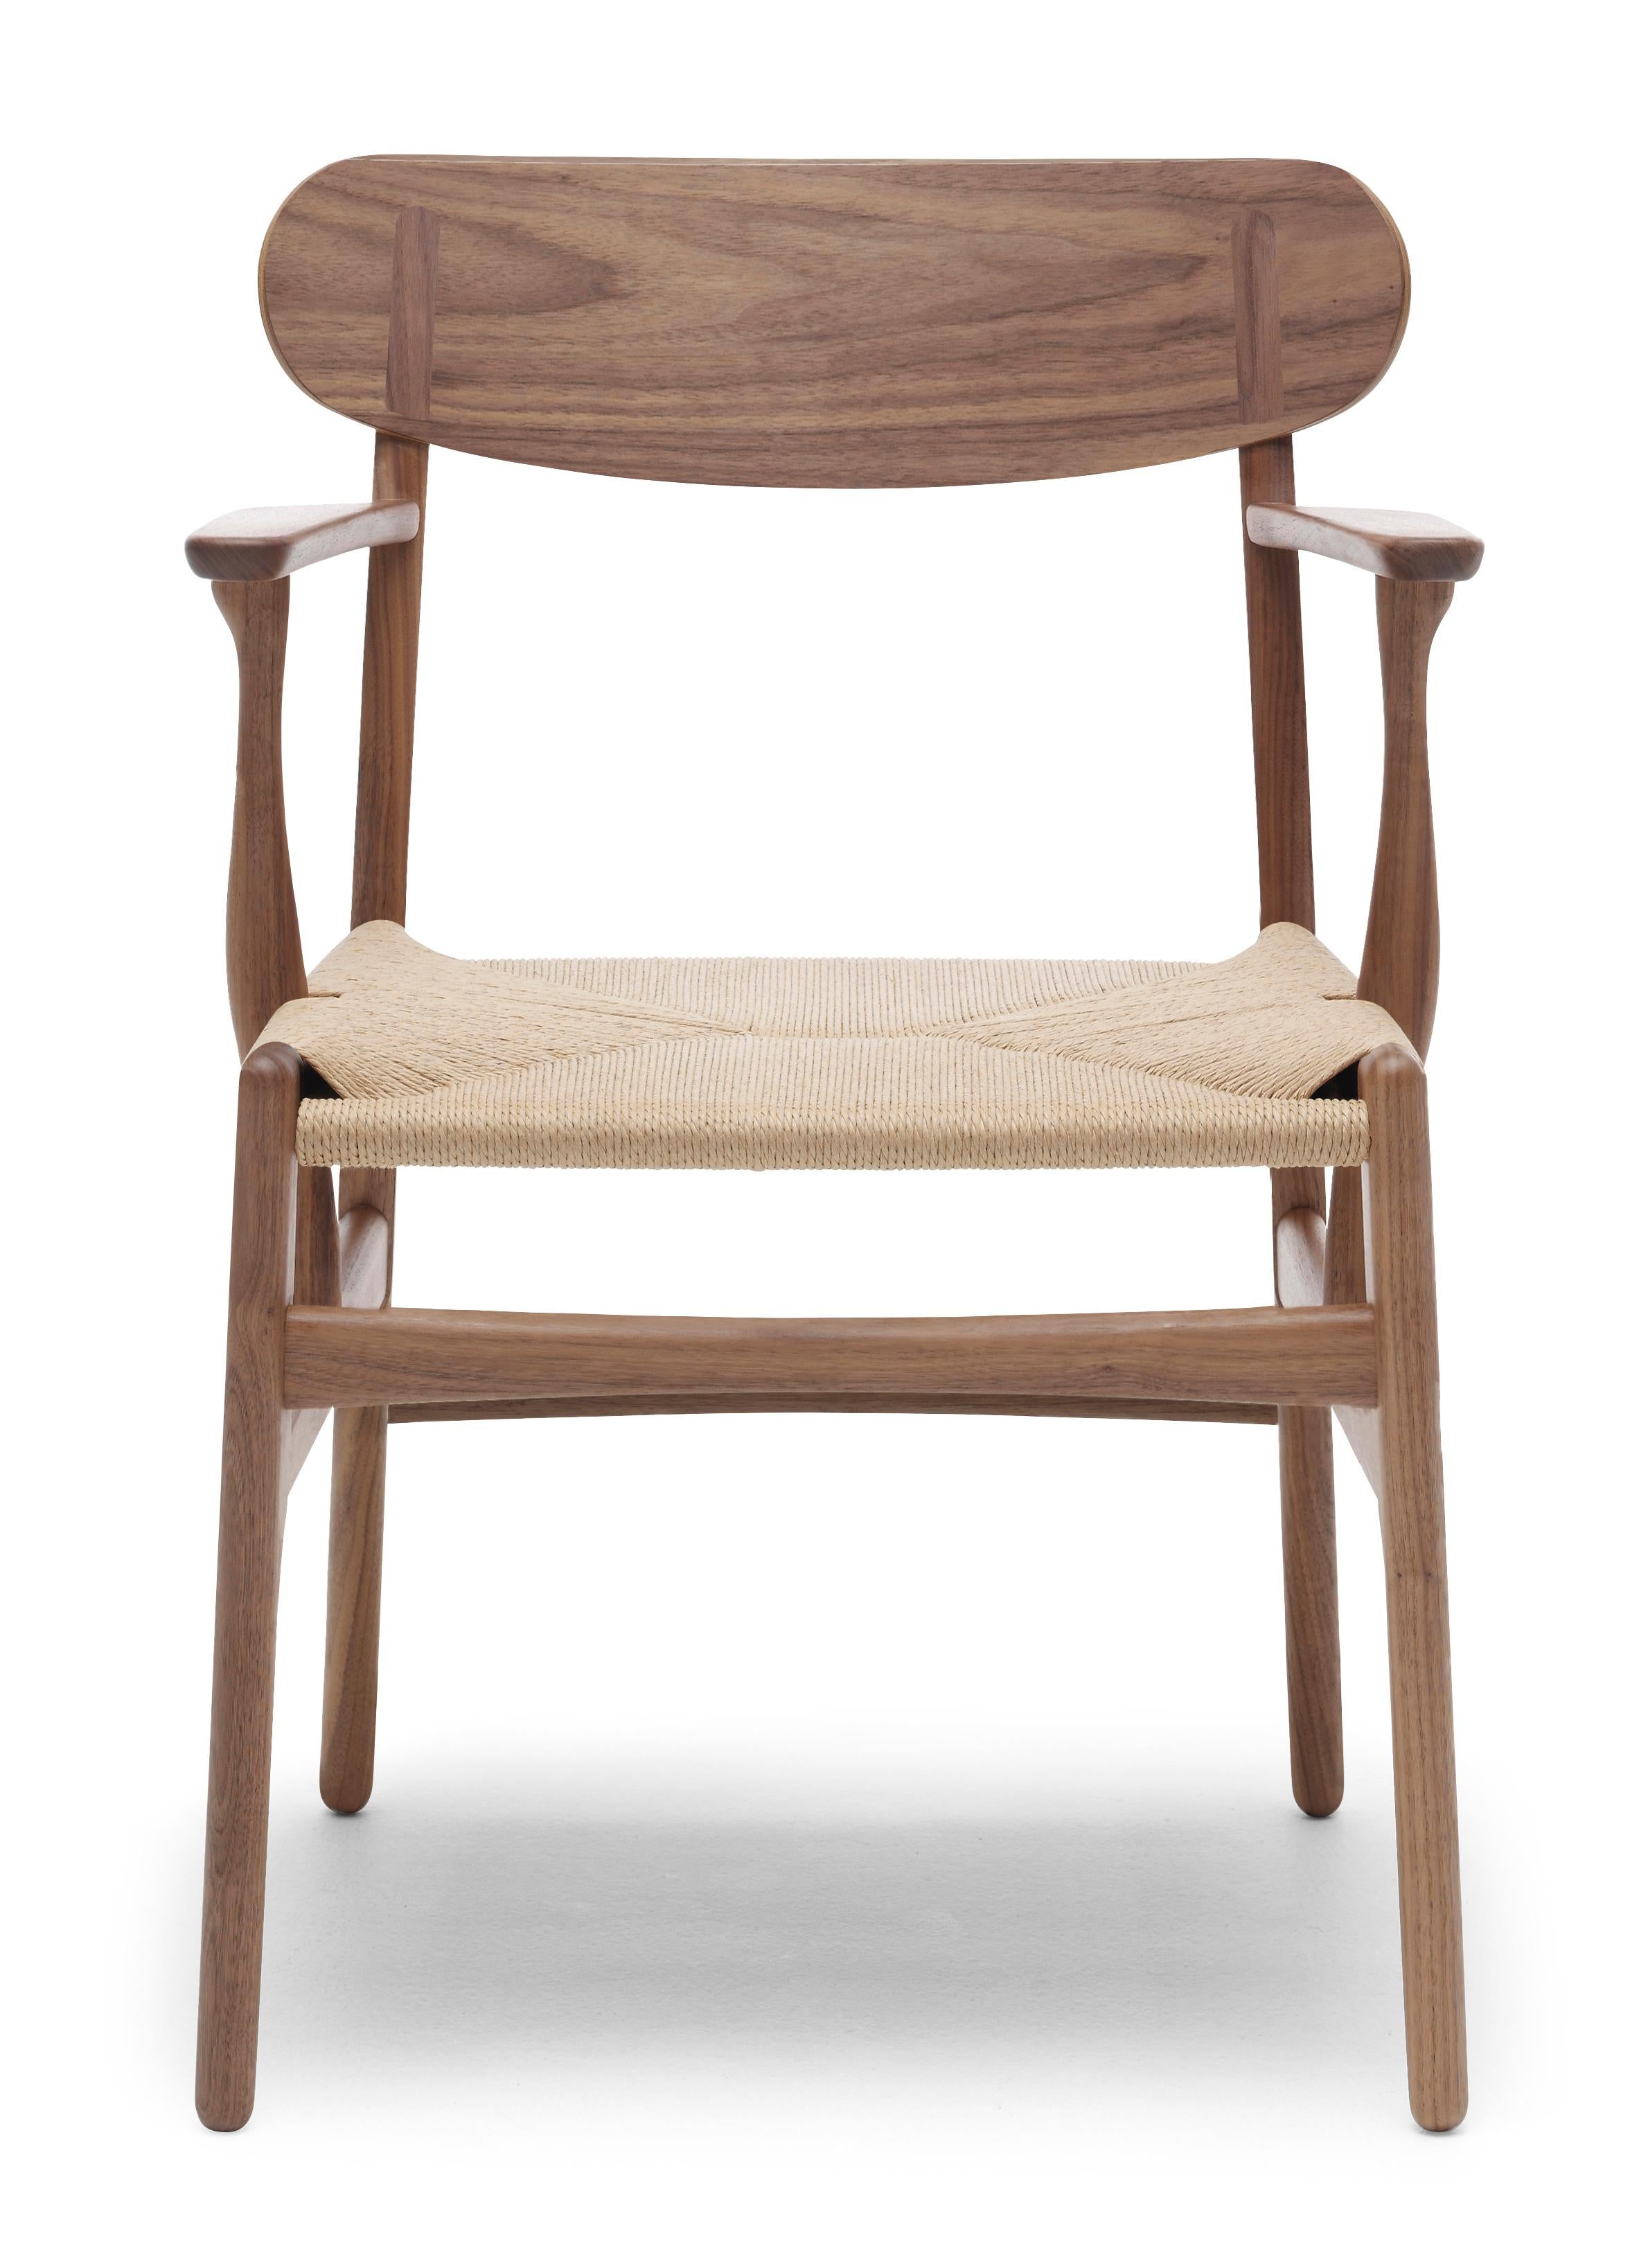 Brown (Walnut Oil) CH26 Dining Chair in Wood Finishes with Natural Papercord Seat by Hans J. Wegner